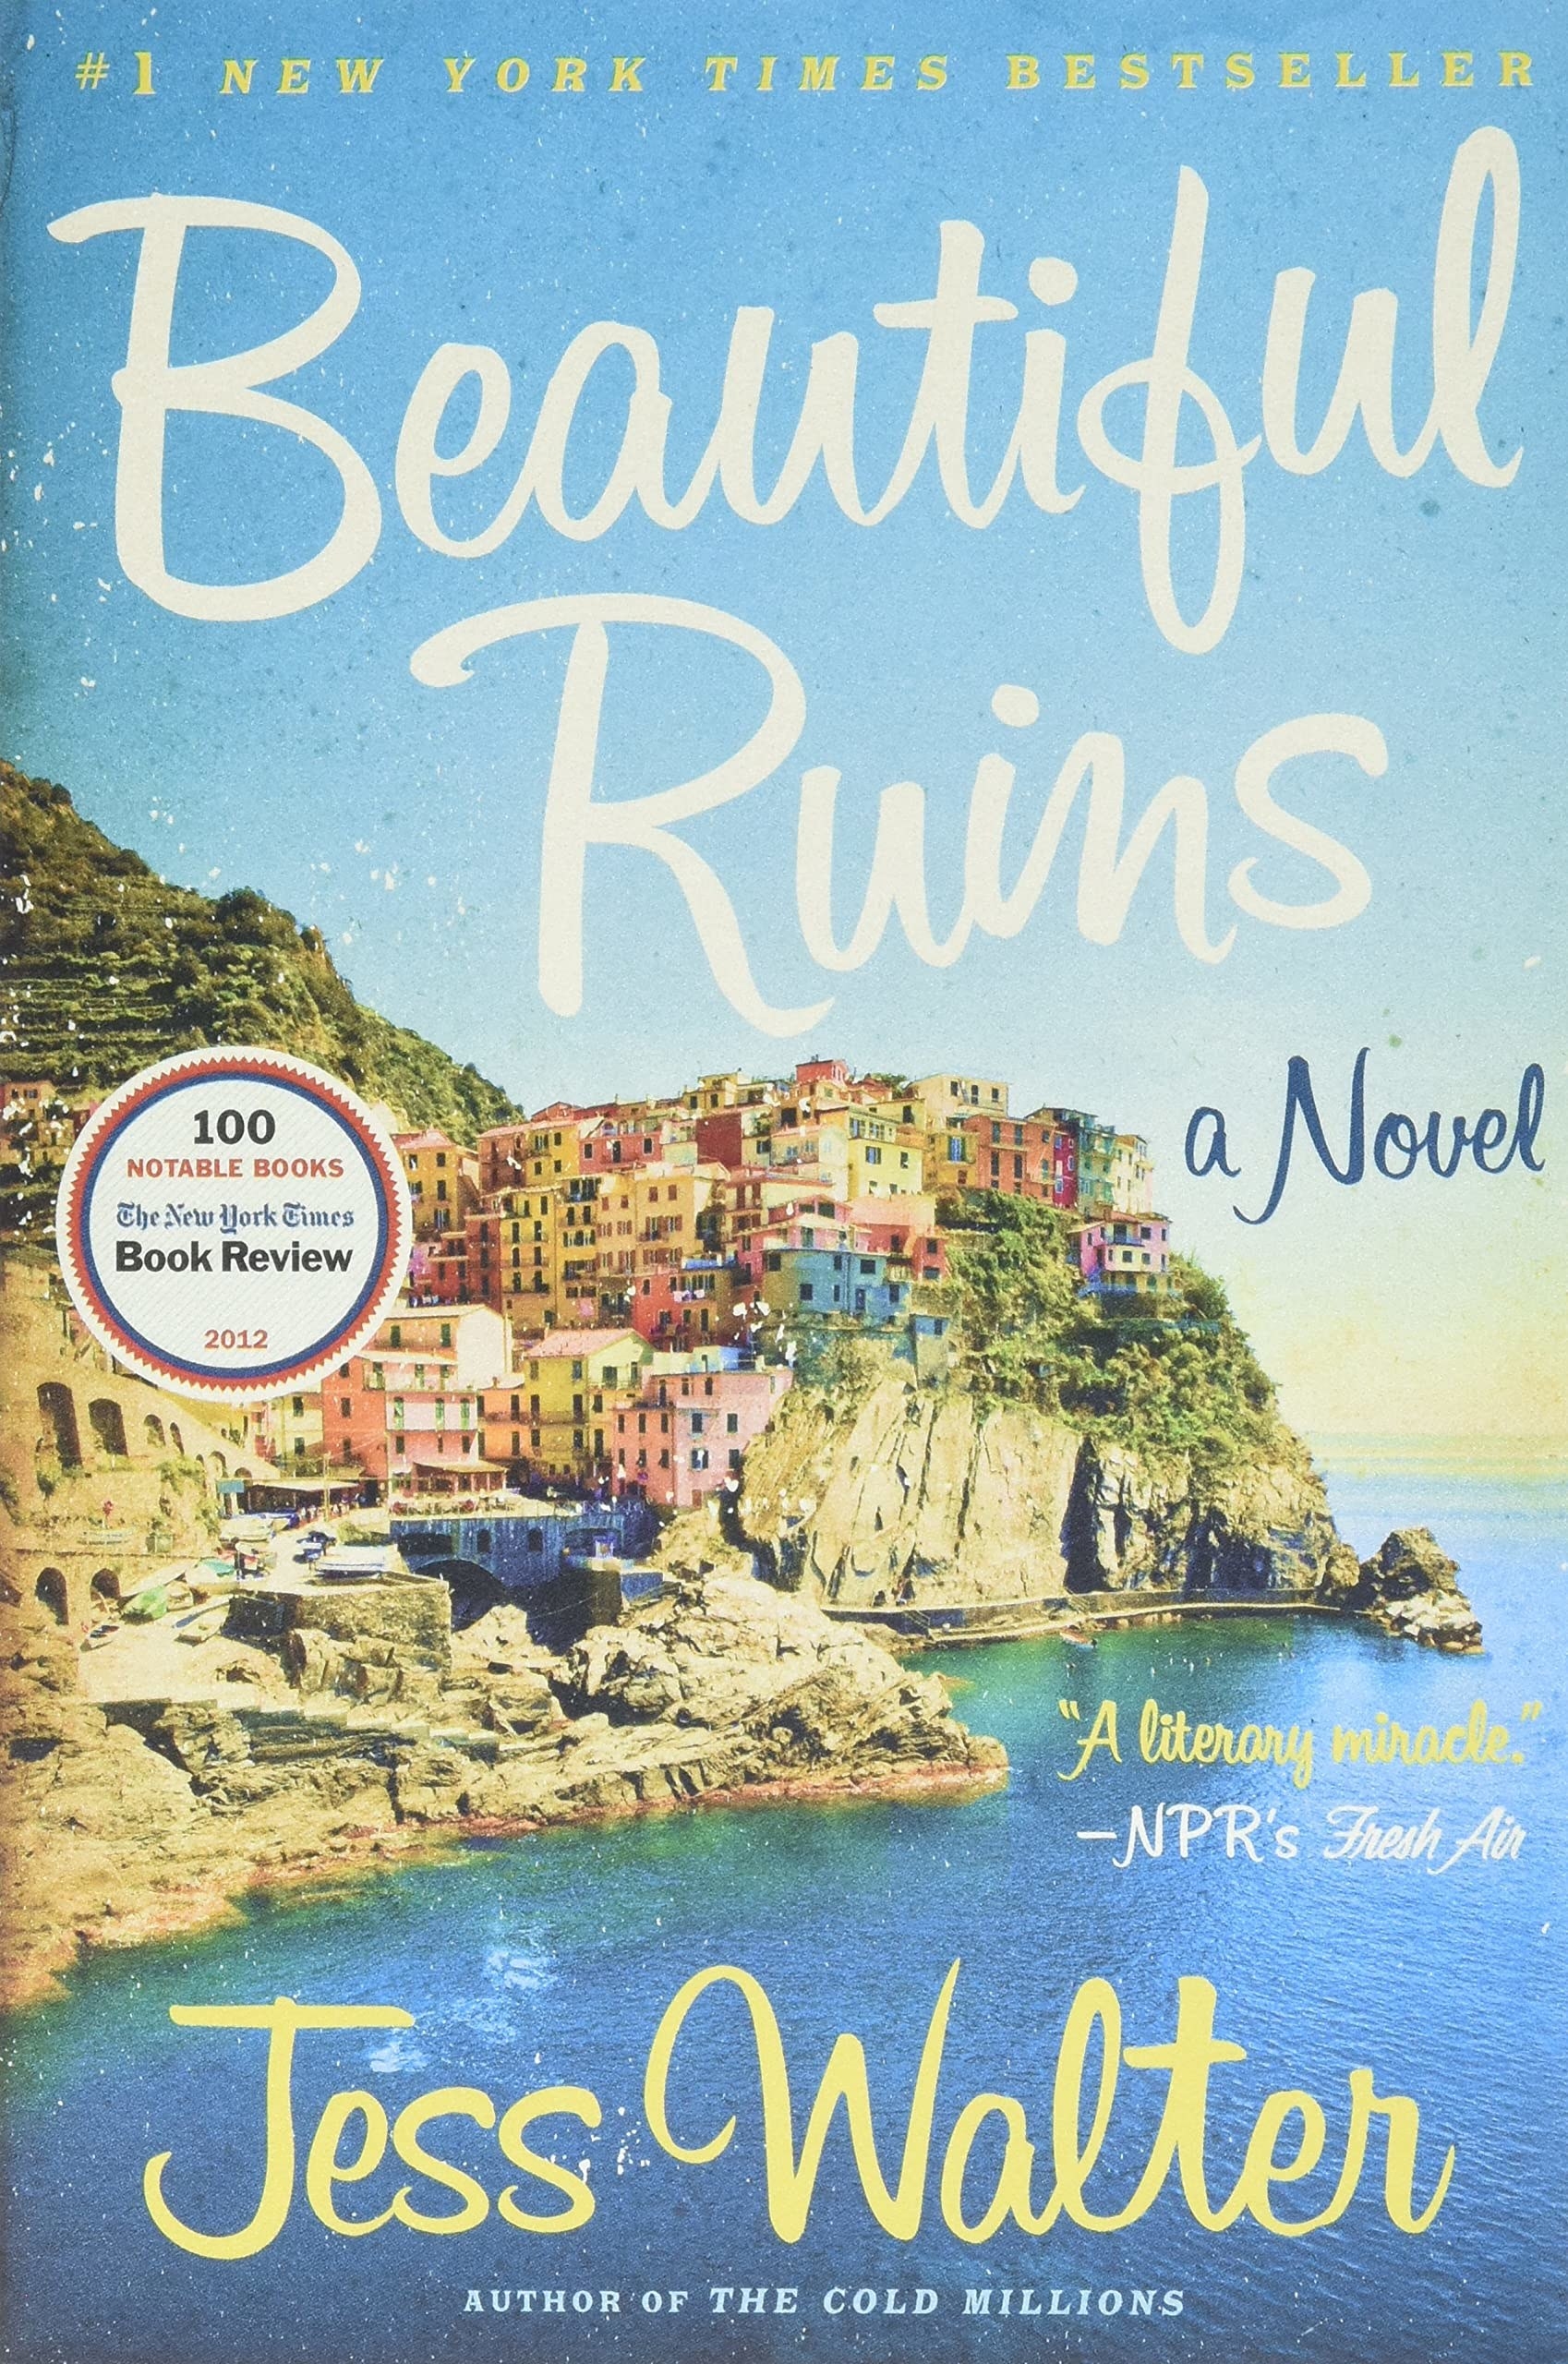 The cover of &quot;Beautiful Ruins&quot; by Jess Walter.